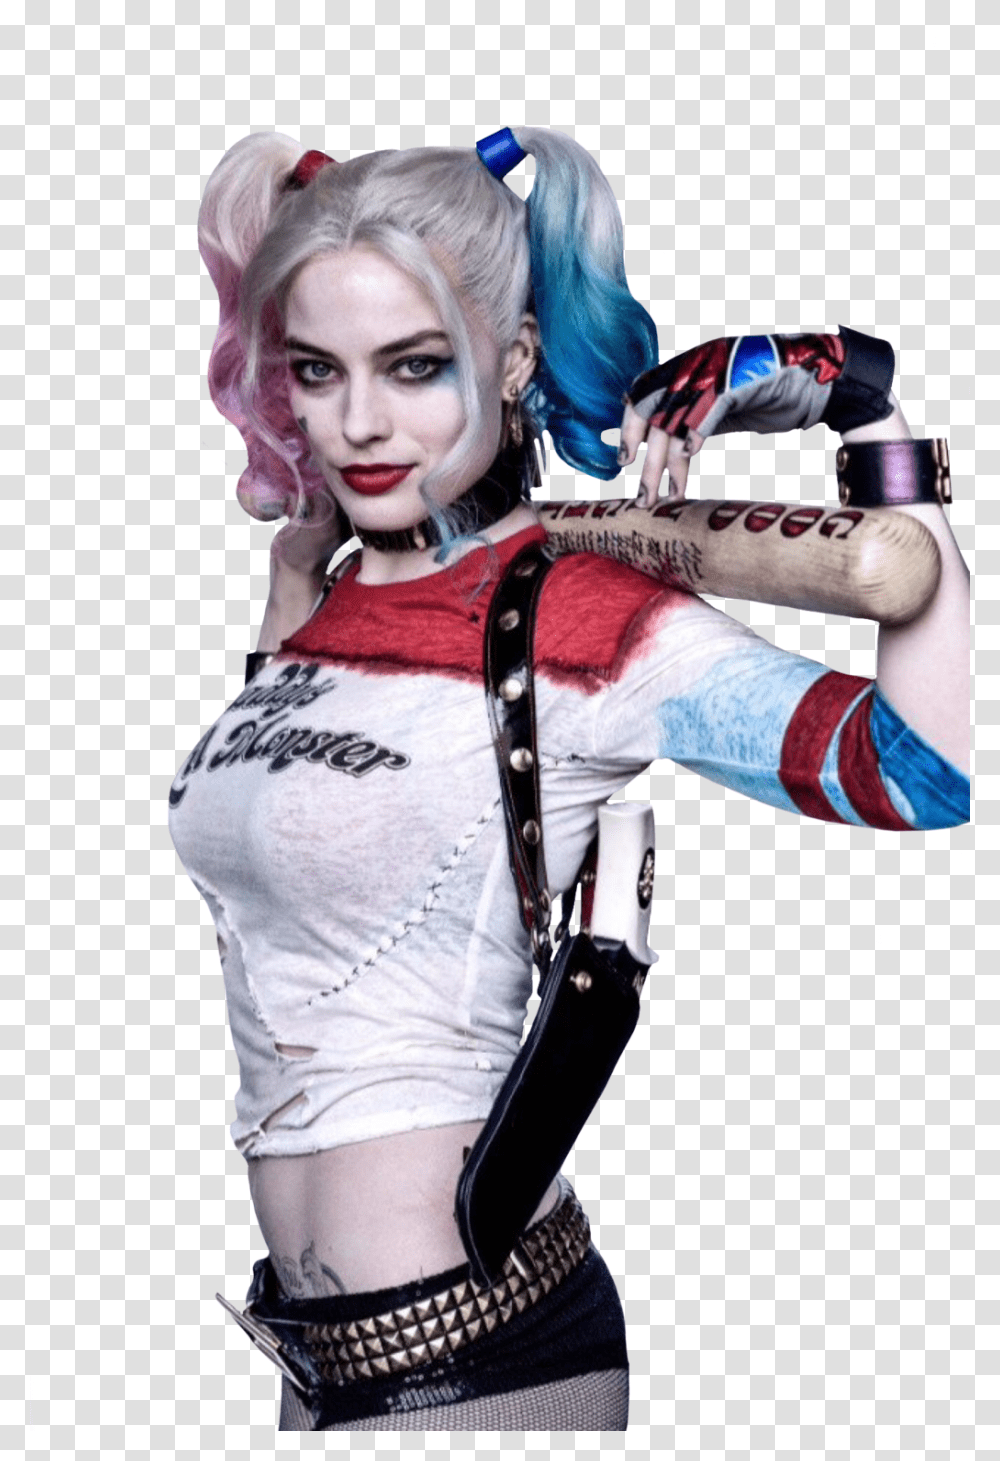 Harley Quinn Images Free Download, Leisure Activities, Person, Costume, Musician Transparent Png